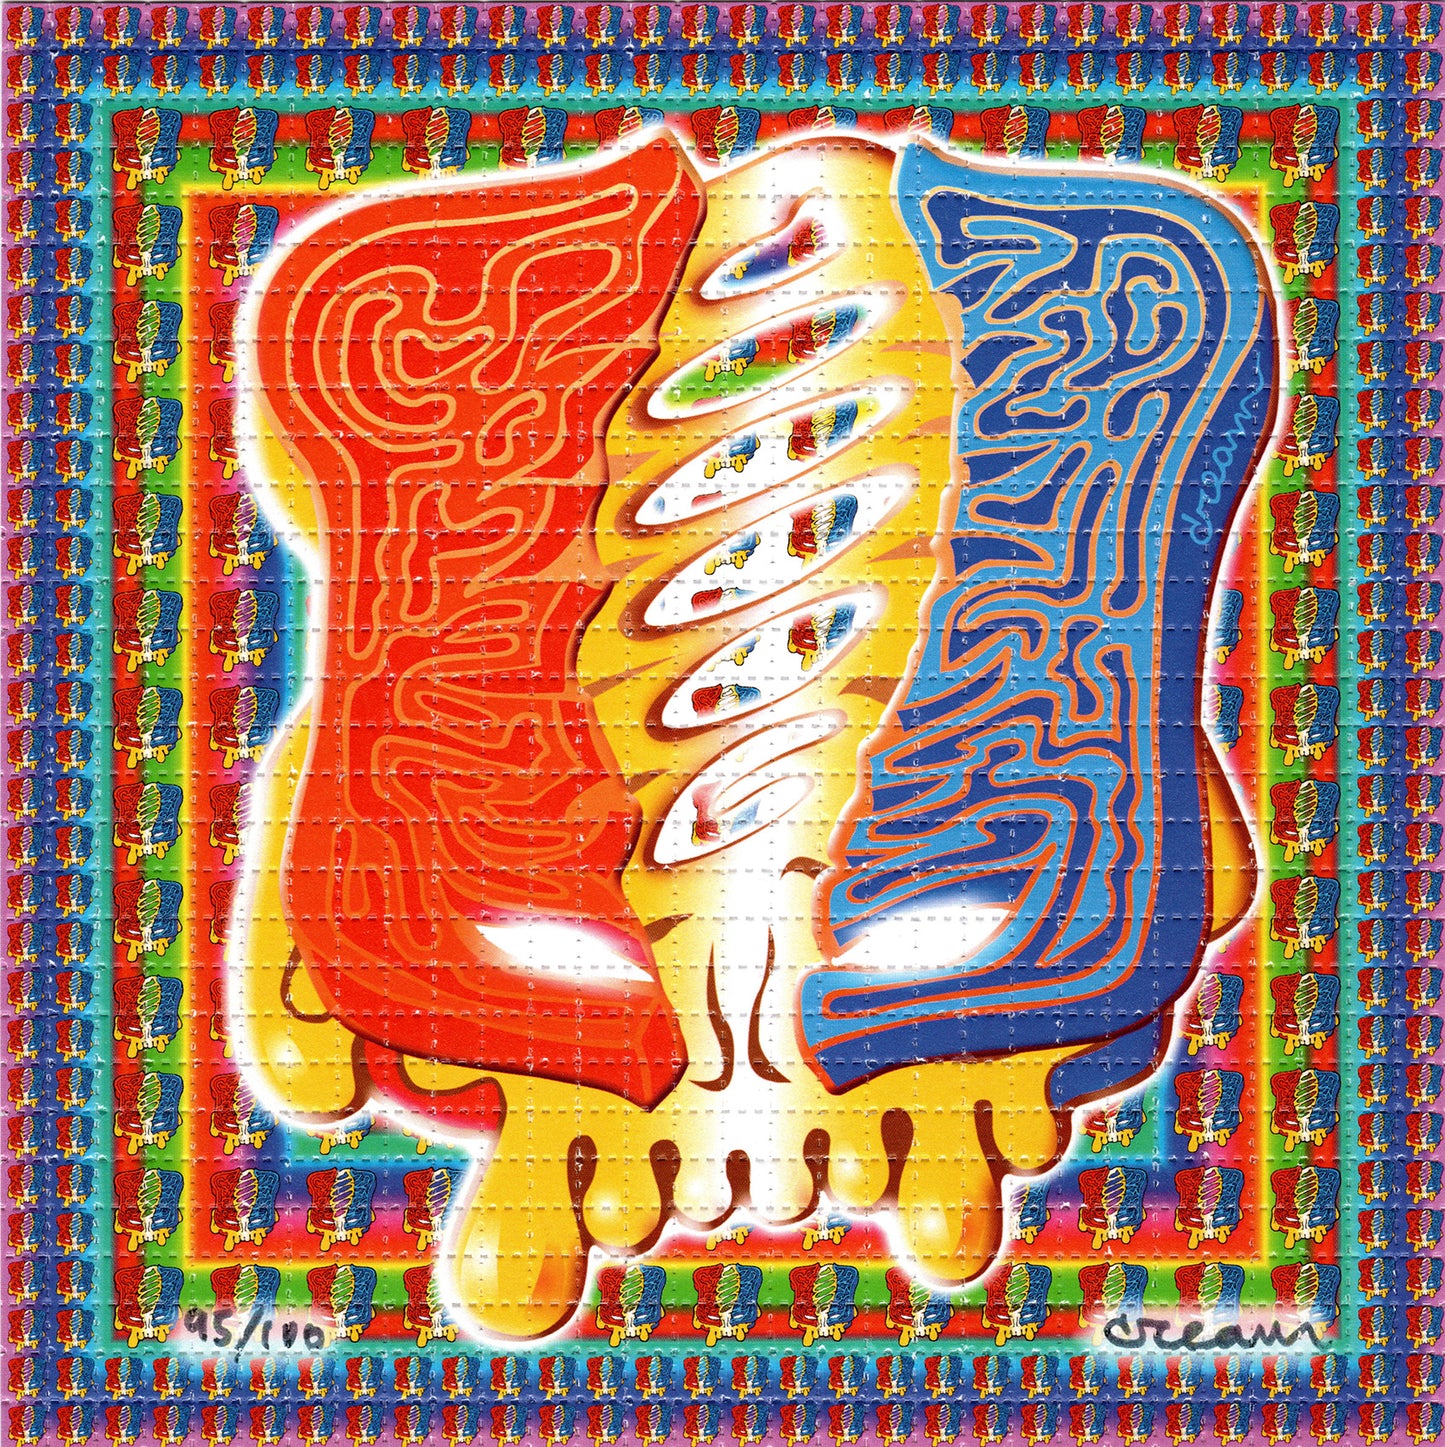 Grateful Grilled Cheese by  CREAM (Peter Kapelyan) Signed Limited Edition LSD blotter art print